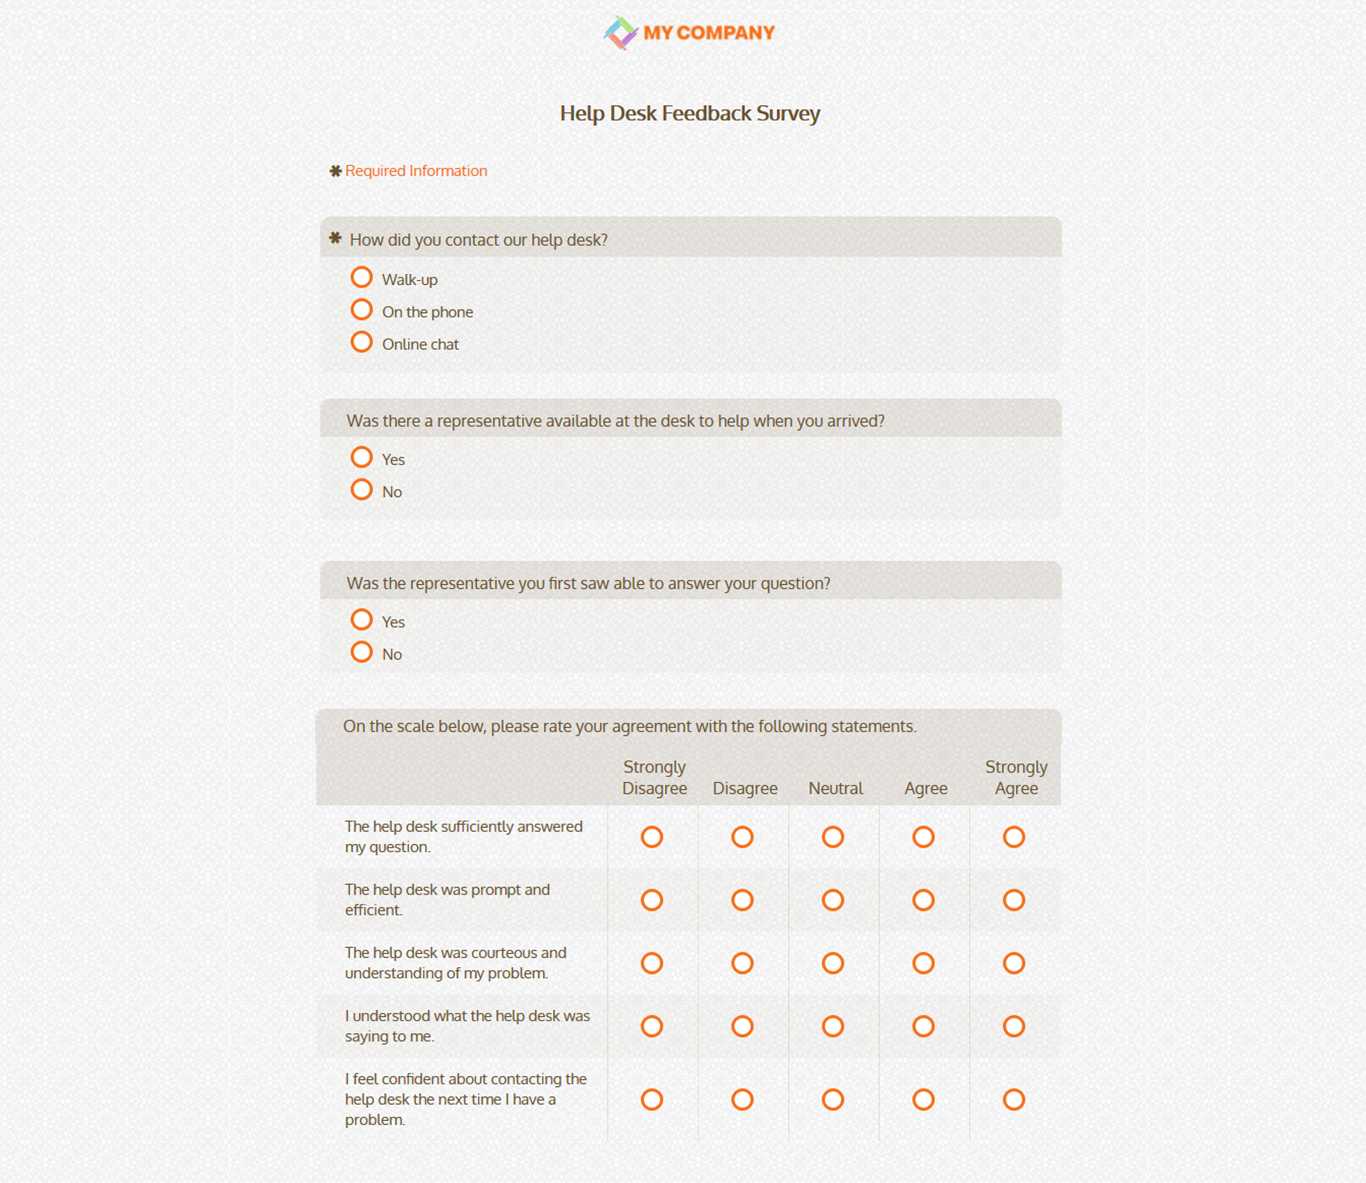 Help Desk Feedback Survey Template [13 Questions] | Sogosurvey Pertaining To Customer Satisfaction Report Template